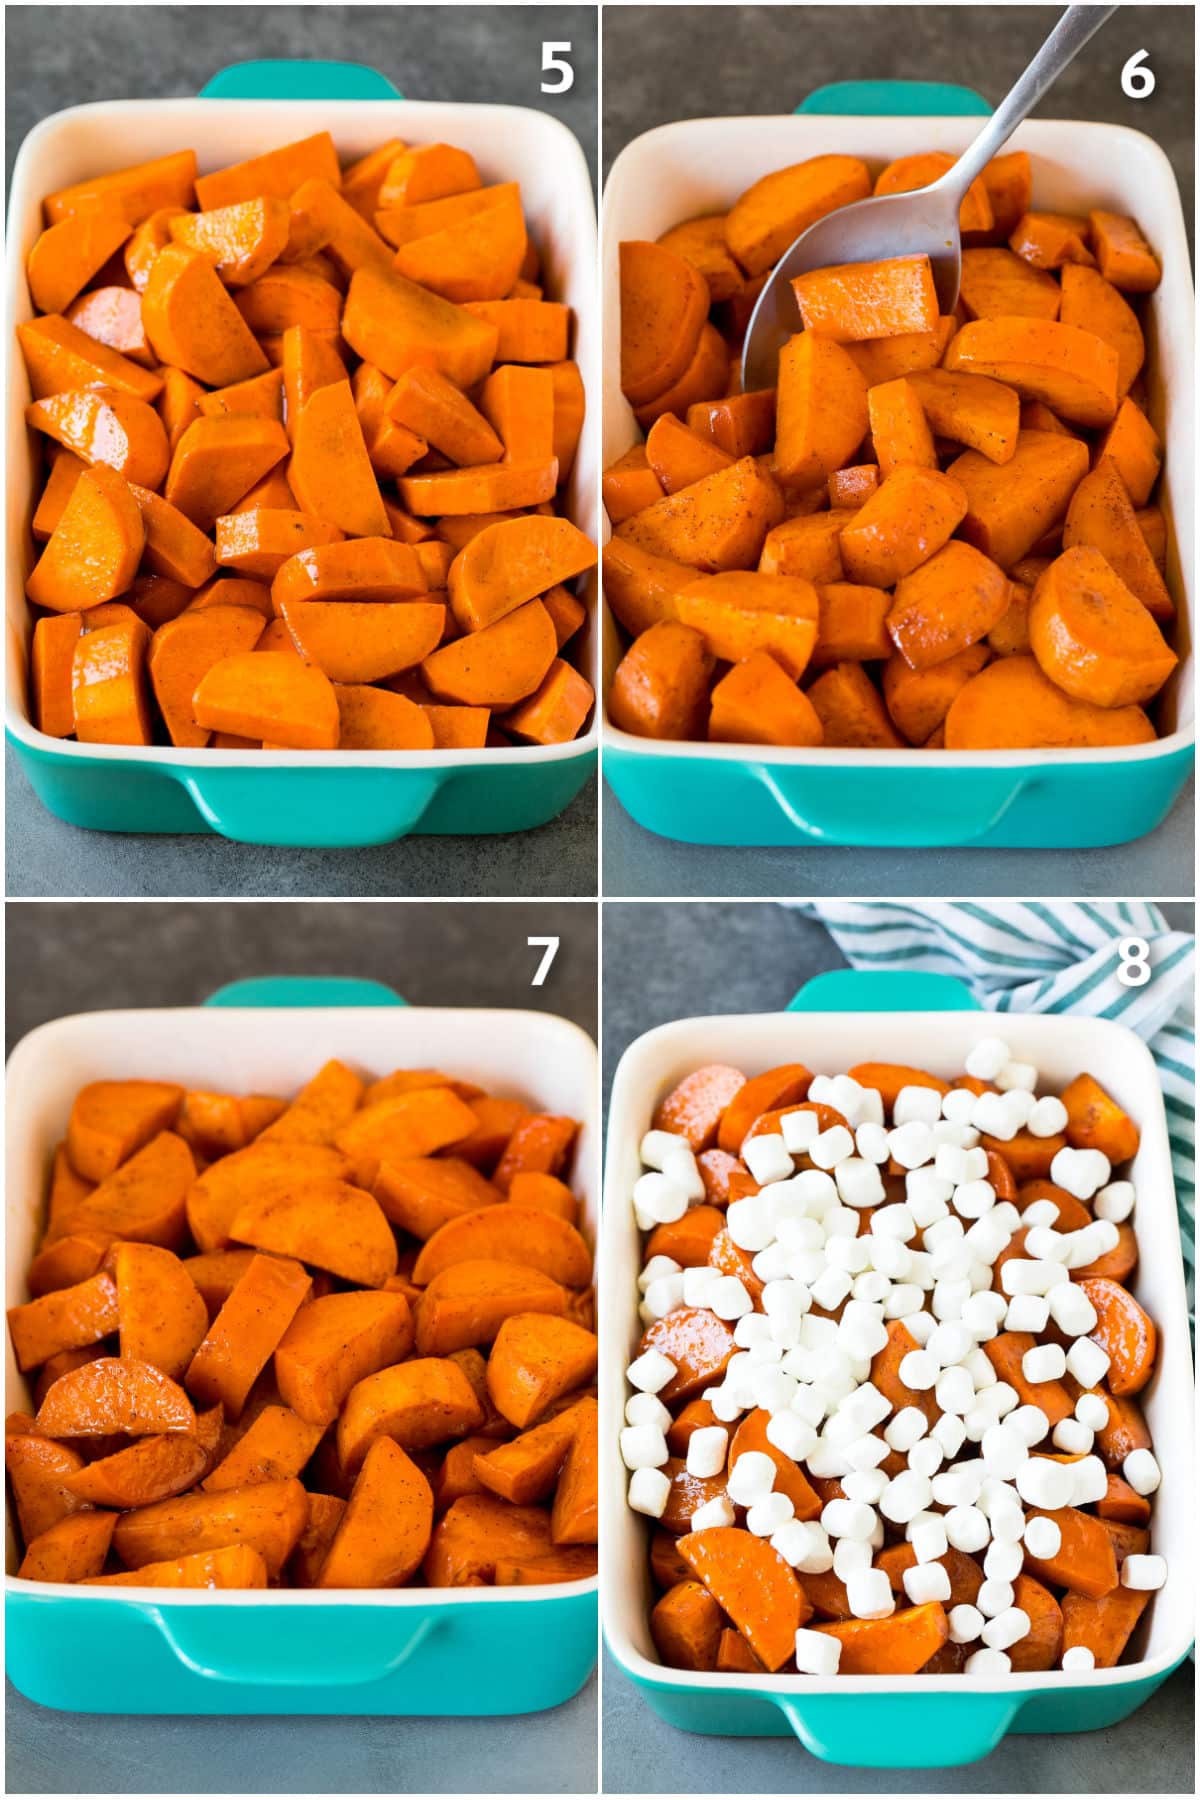 Process shots showing how to make candied yams with marshmallows.